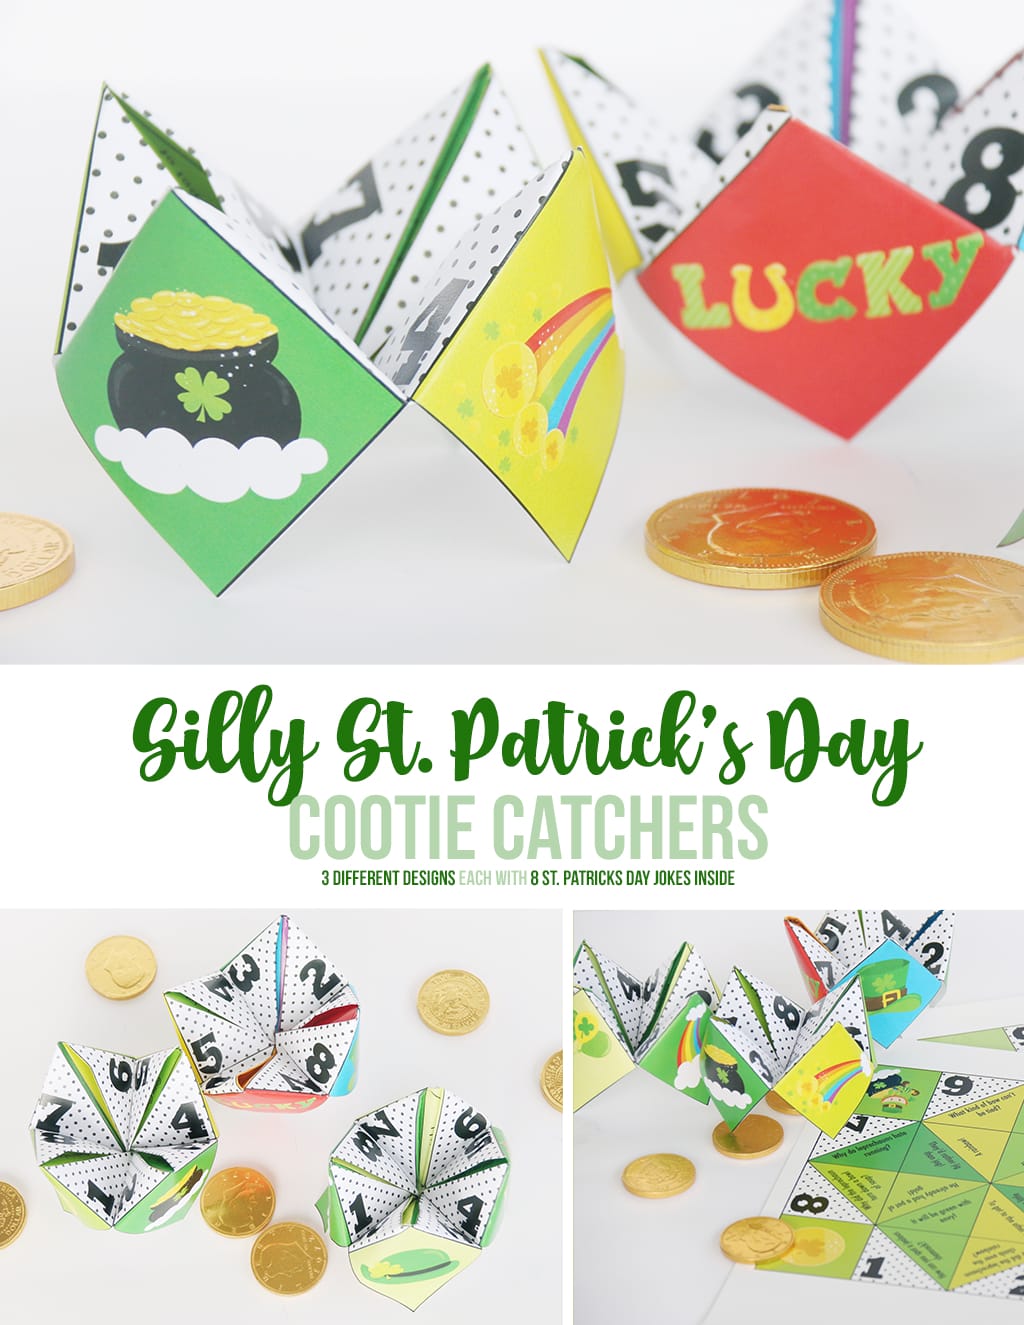 Silly St. Patrick's Day Cootie Catchers printables